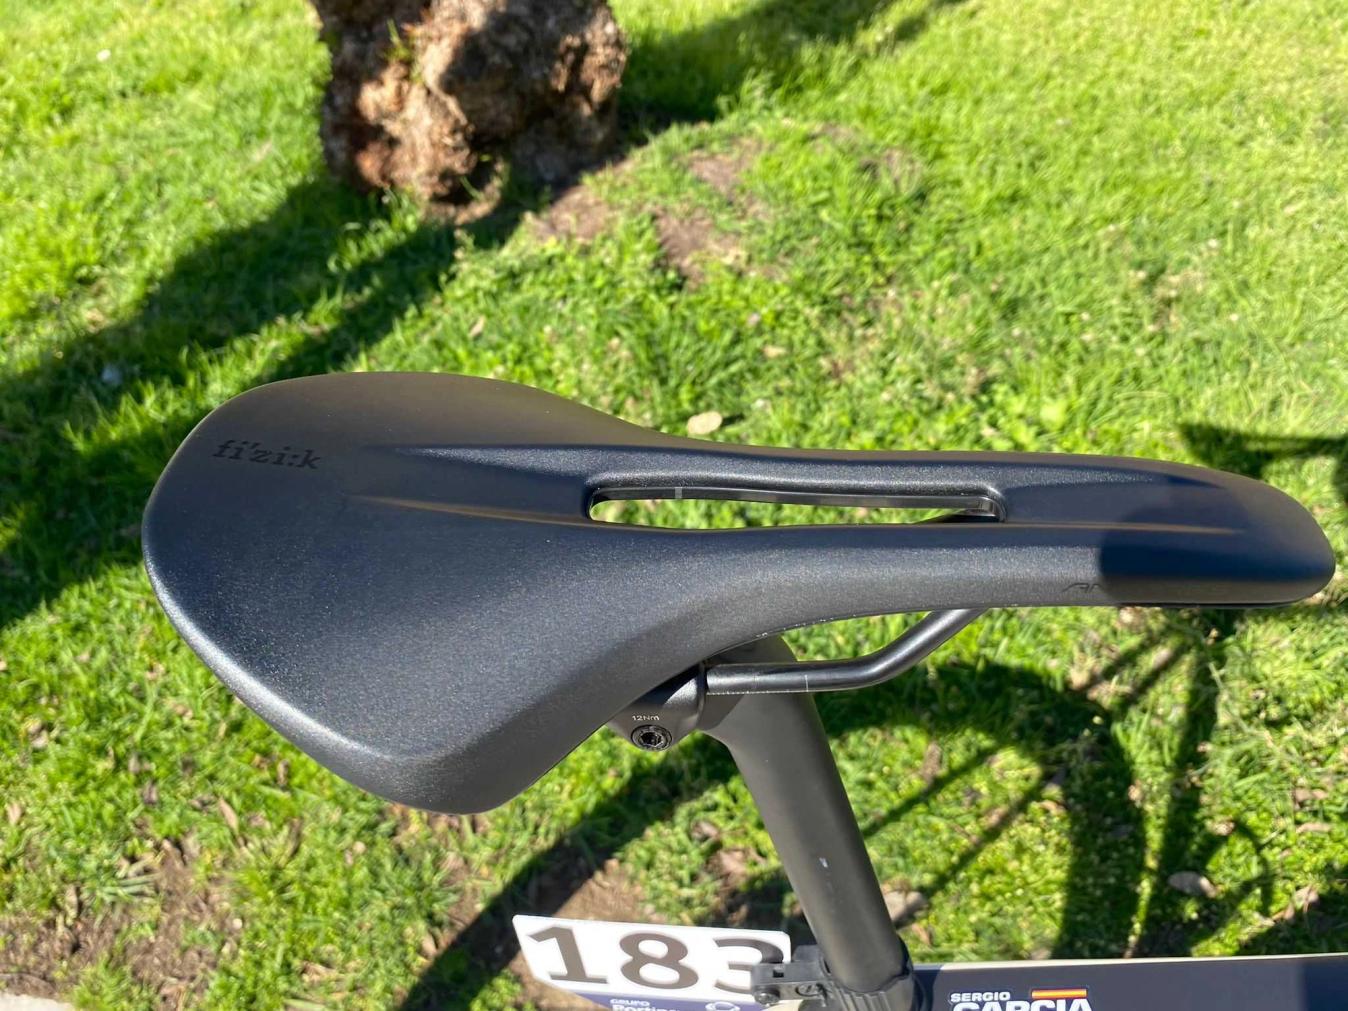 The Fizik Antares saddle features a cut out